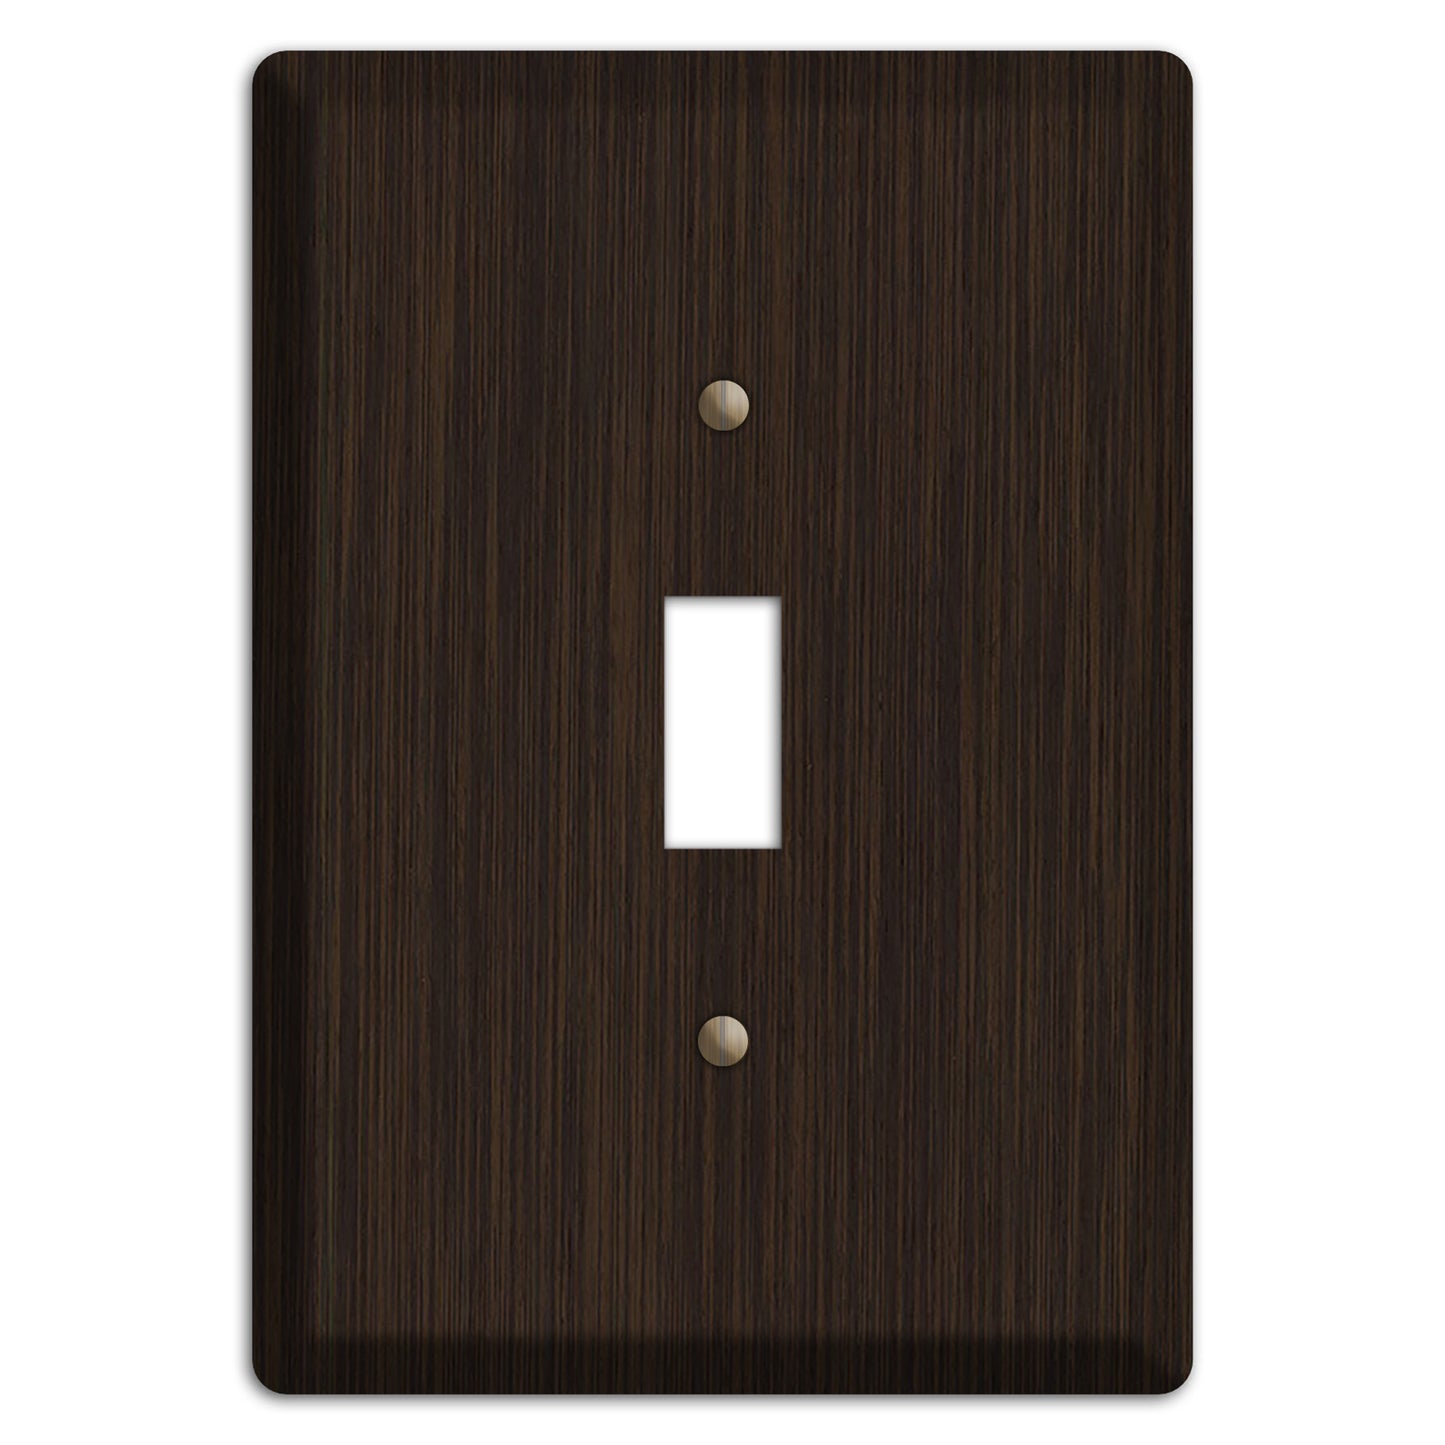 Wenge Wood Cover Plates